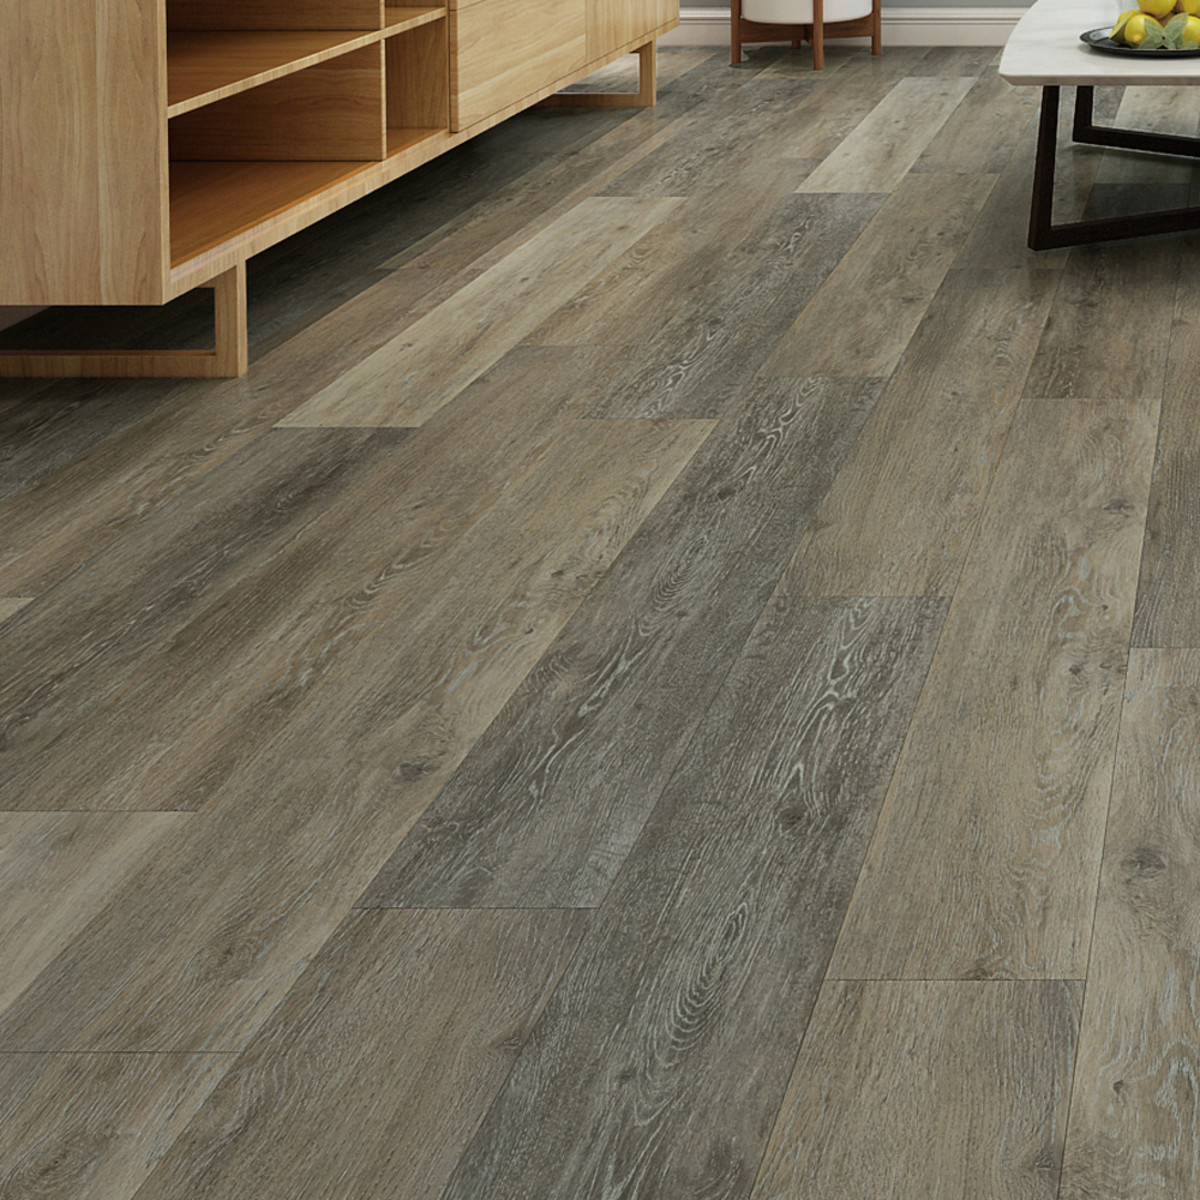 Reviews Parkay Floors Xpr Architect 5 2mm Polymer Rigid Core Waterproof Flooring Victorian Ash Xpr Pararcvic 3 16 Flooring Tools Installation Supplies Jnsflooringandsupplies Com The Only Thing Better Than Our Selection